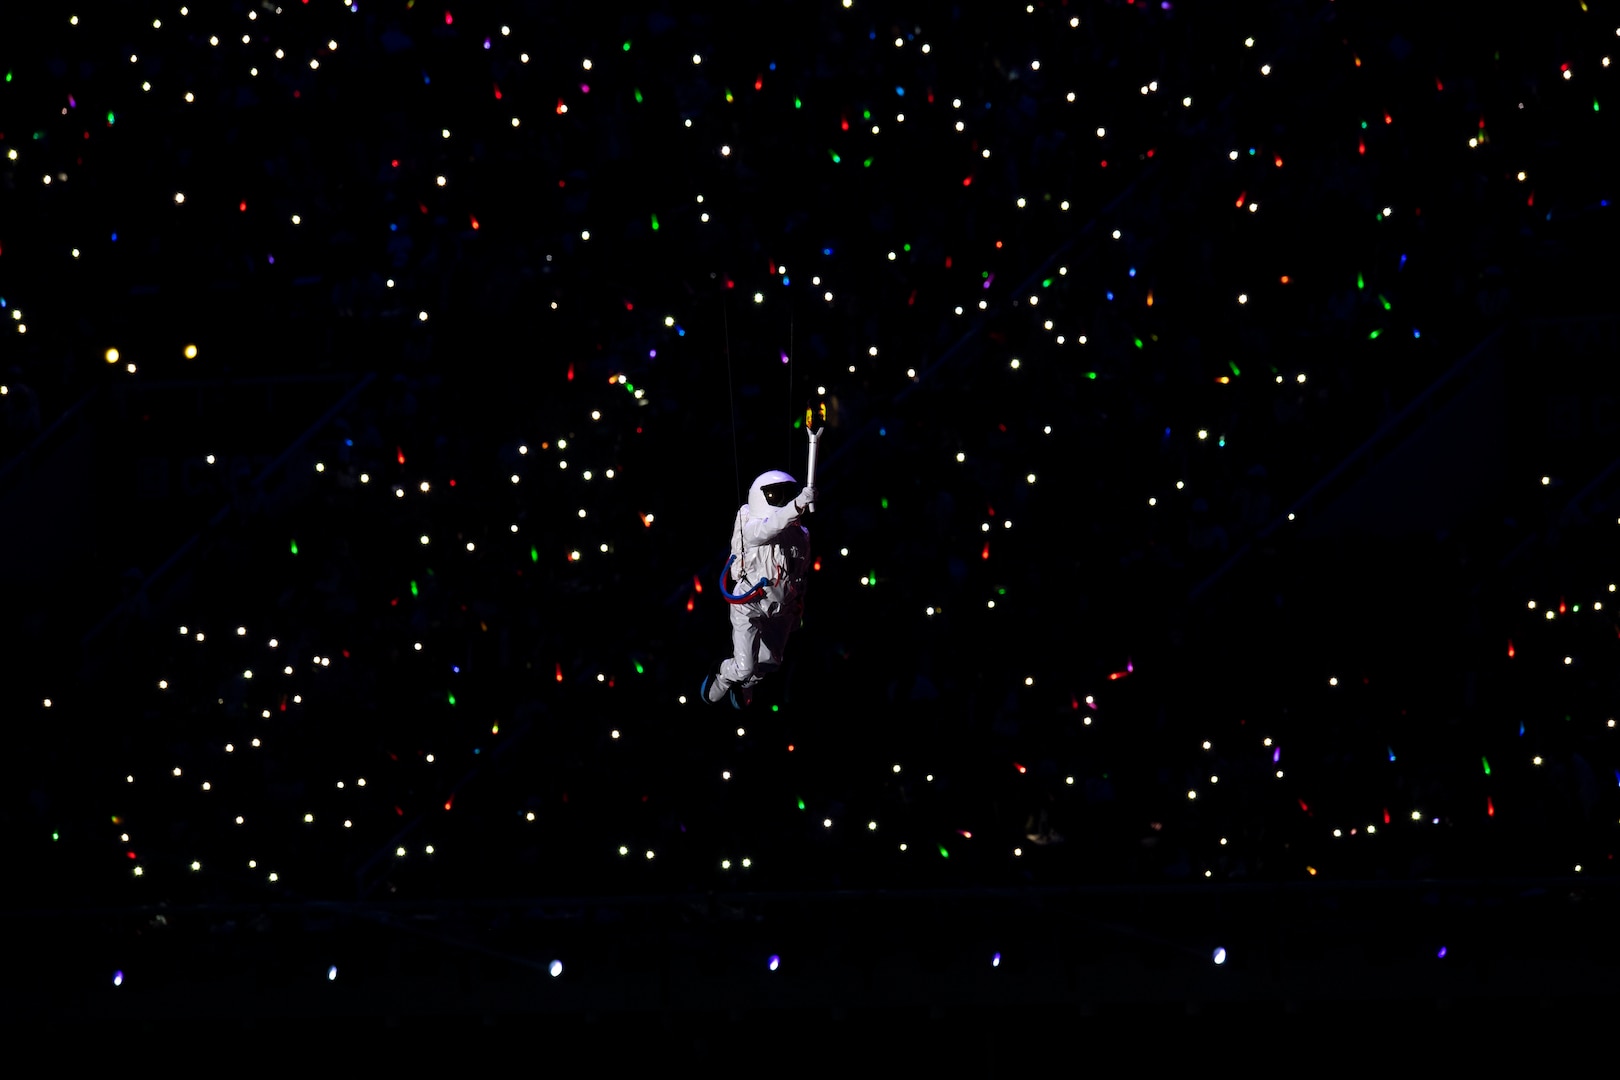 An entertainer floats by wire past a crowd holding light sticks during opening ceremonies for the 2019 CISM Military World Games in Wuhan, China Oct. 18, 2019. Teams from more than 100 countries will compete in dozens of sporting events through Oct. 28. (DoD photo by EJ Hersom)